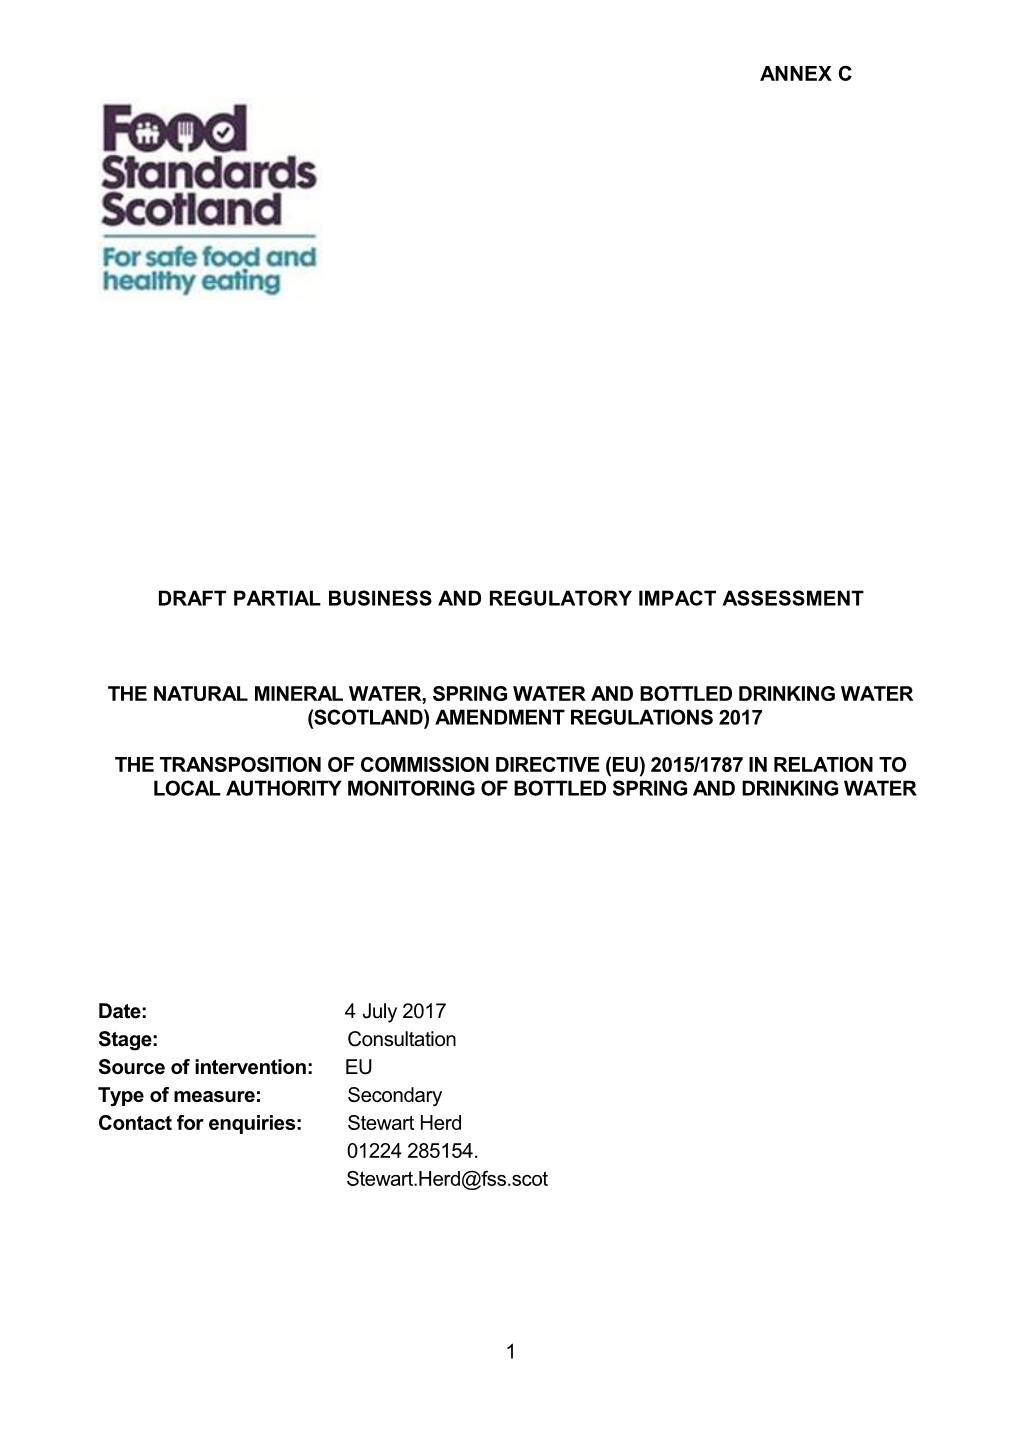 DRAFT PARTIAL BUSINESS and Regulatory Impact Assessment